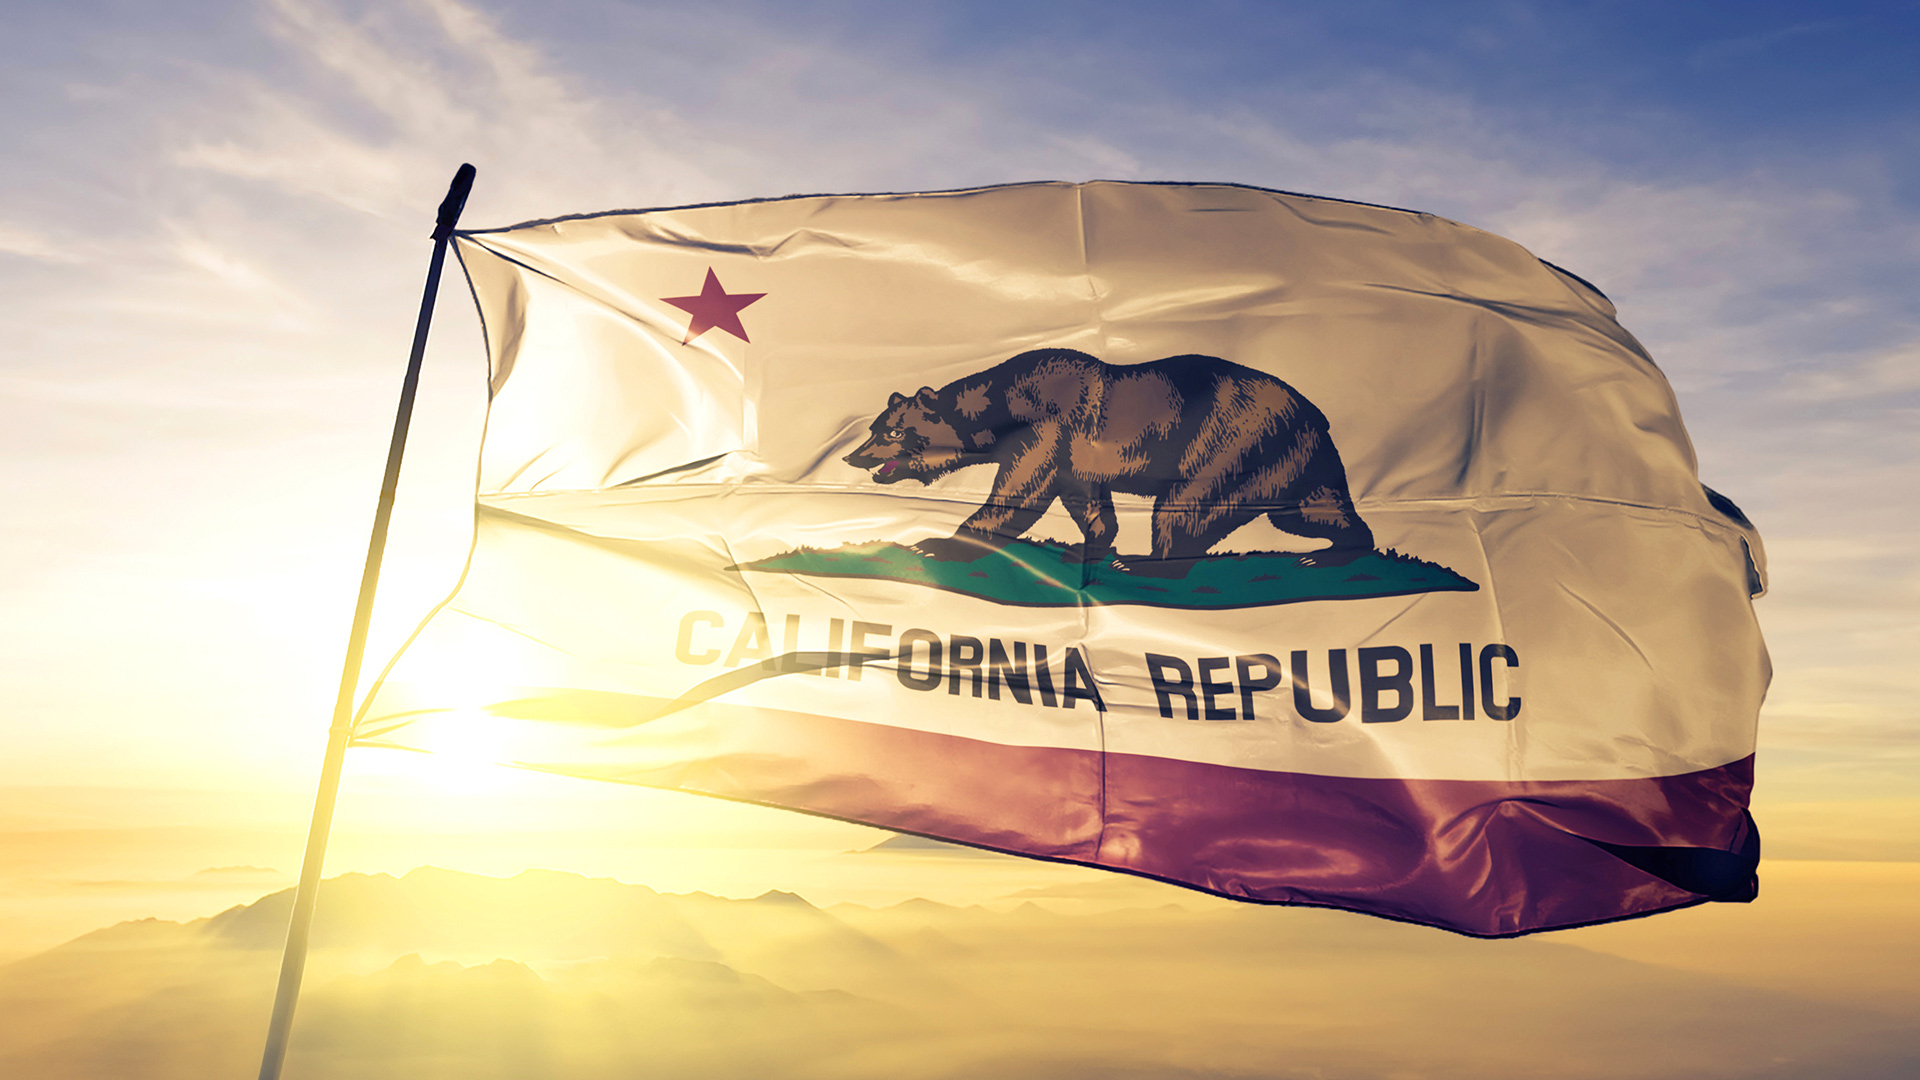 California employment law wrap-up: The top five developments for California employers in May 2021